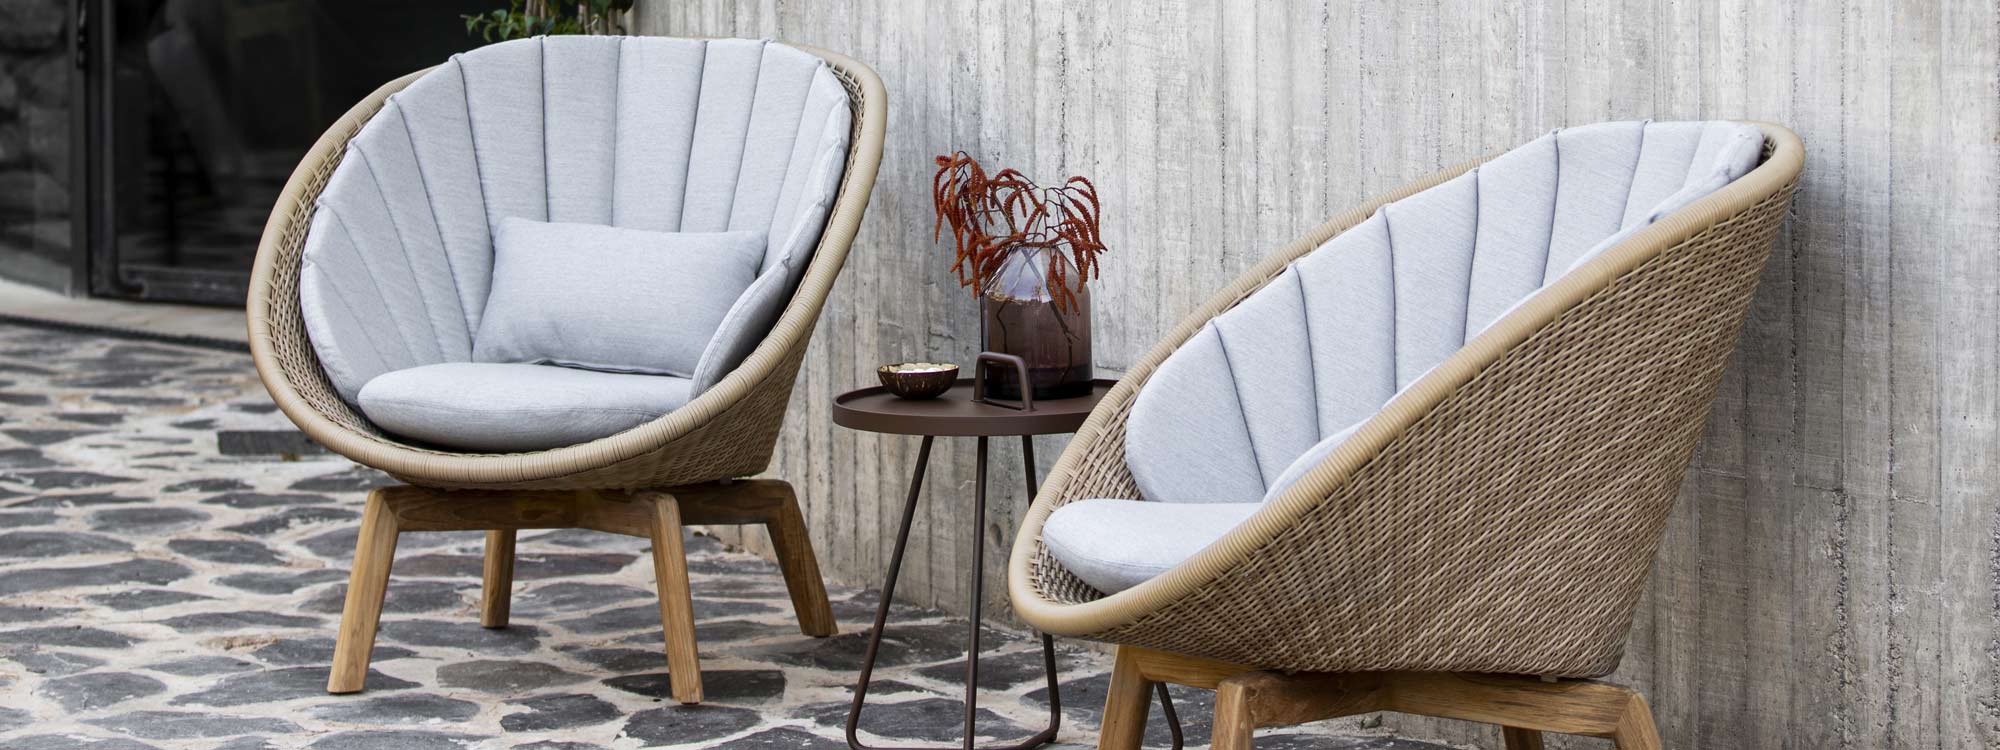 Image of pair of Peacock lounge chairs in natural Cane-line weave with taupe cushions